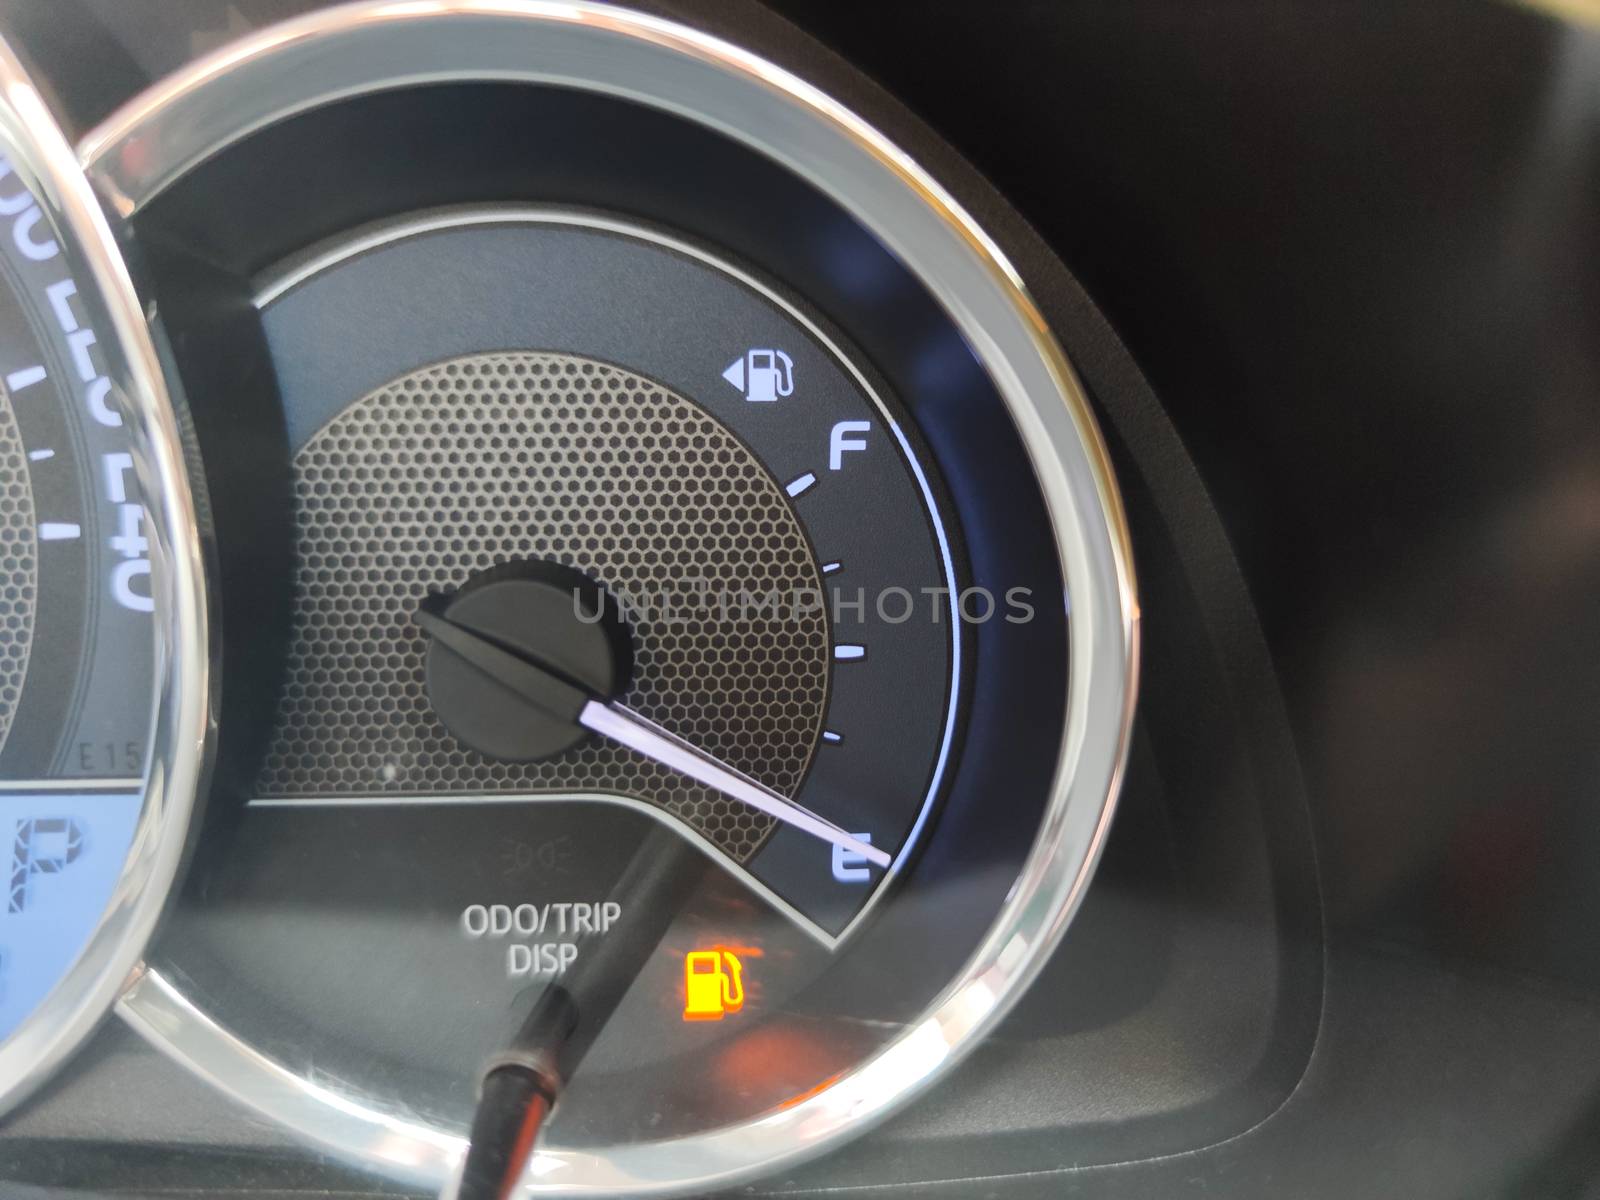 close-up fuel gauge showing empty tank with yellow light glowing